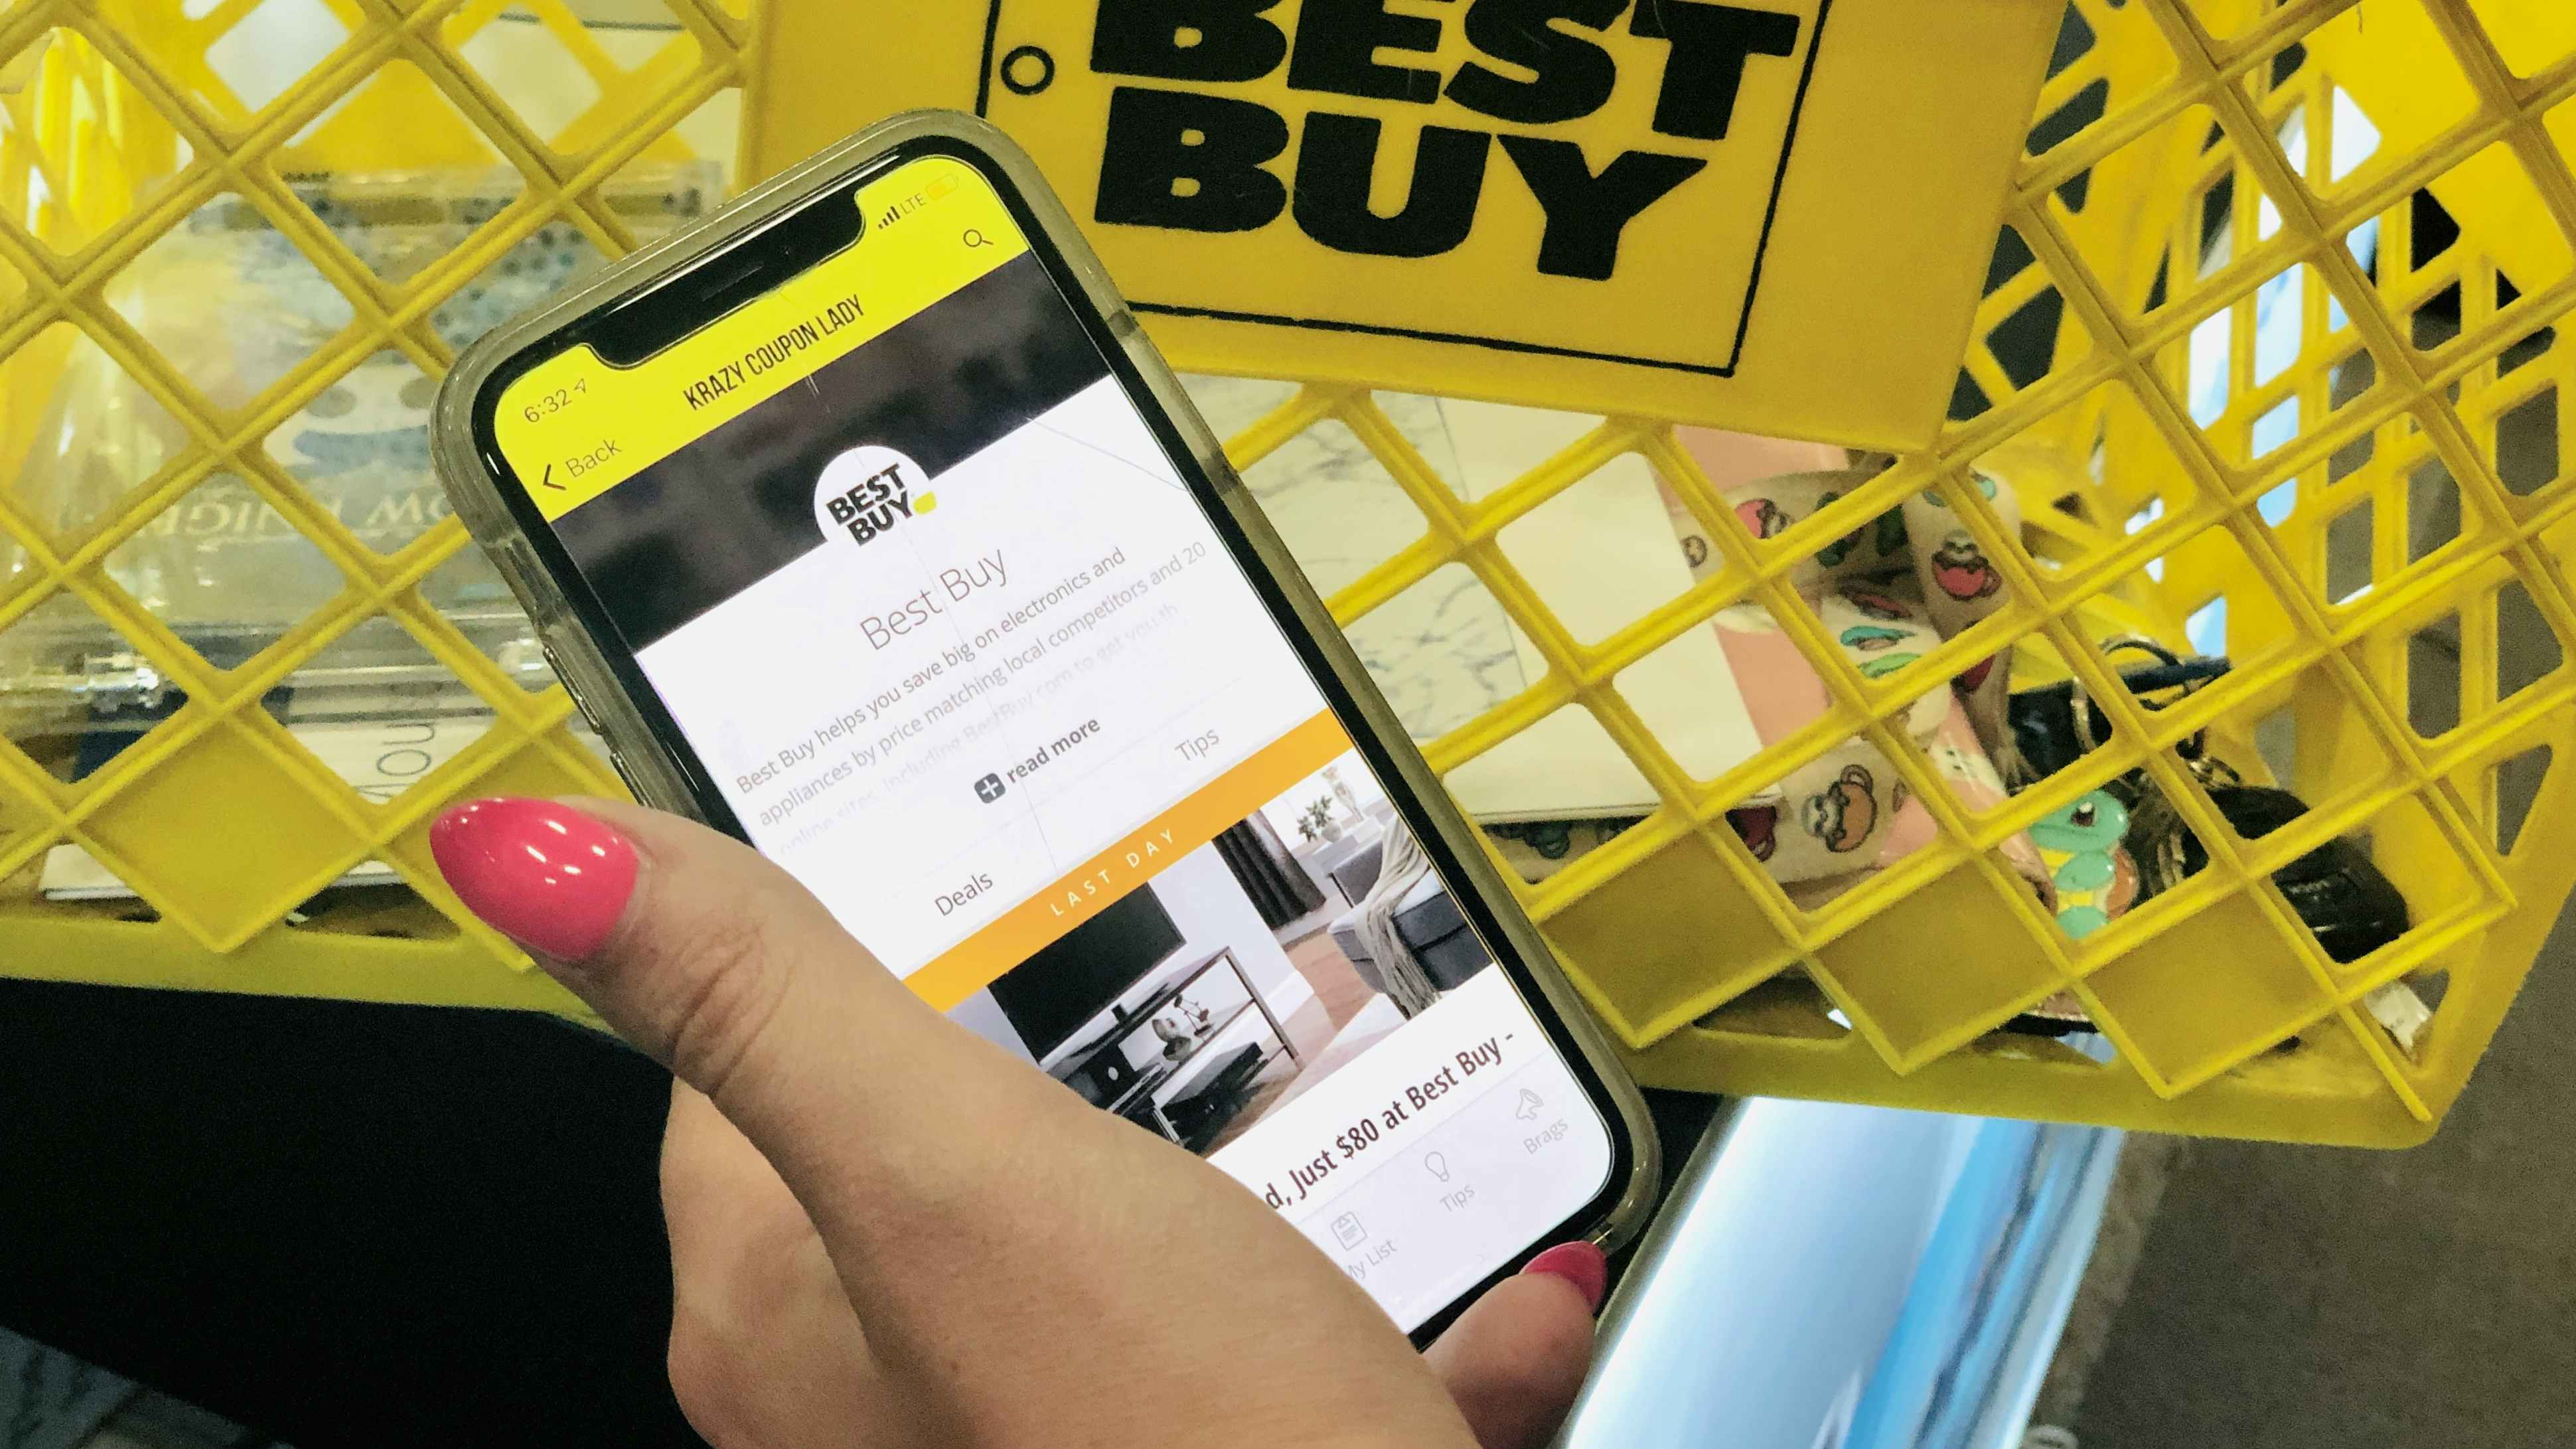 How to Score a Deal at Best Buy - Reviewed